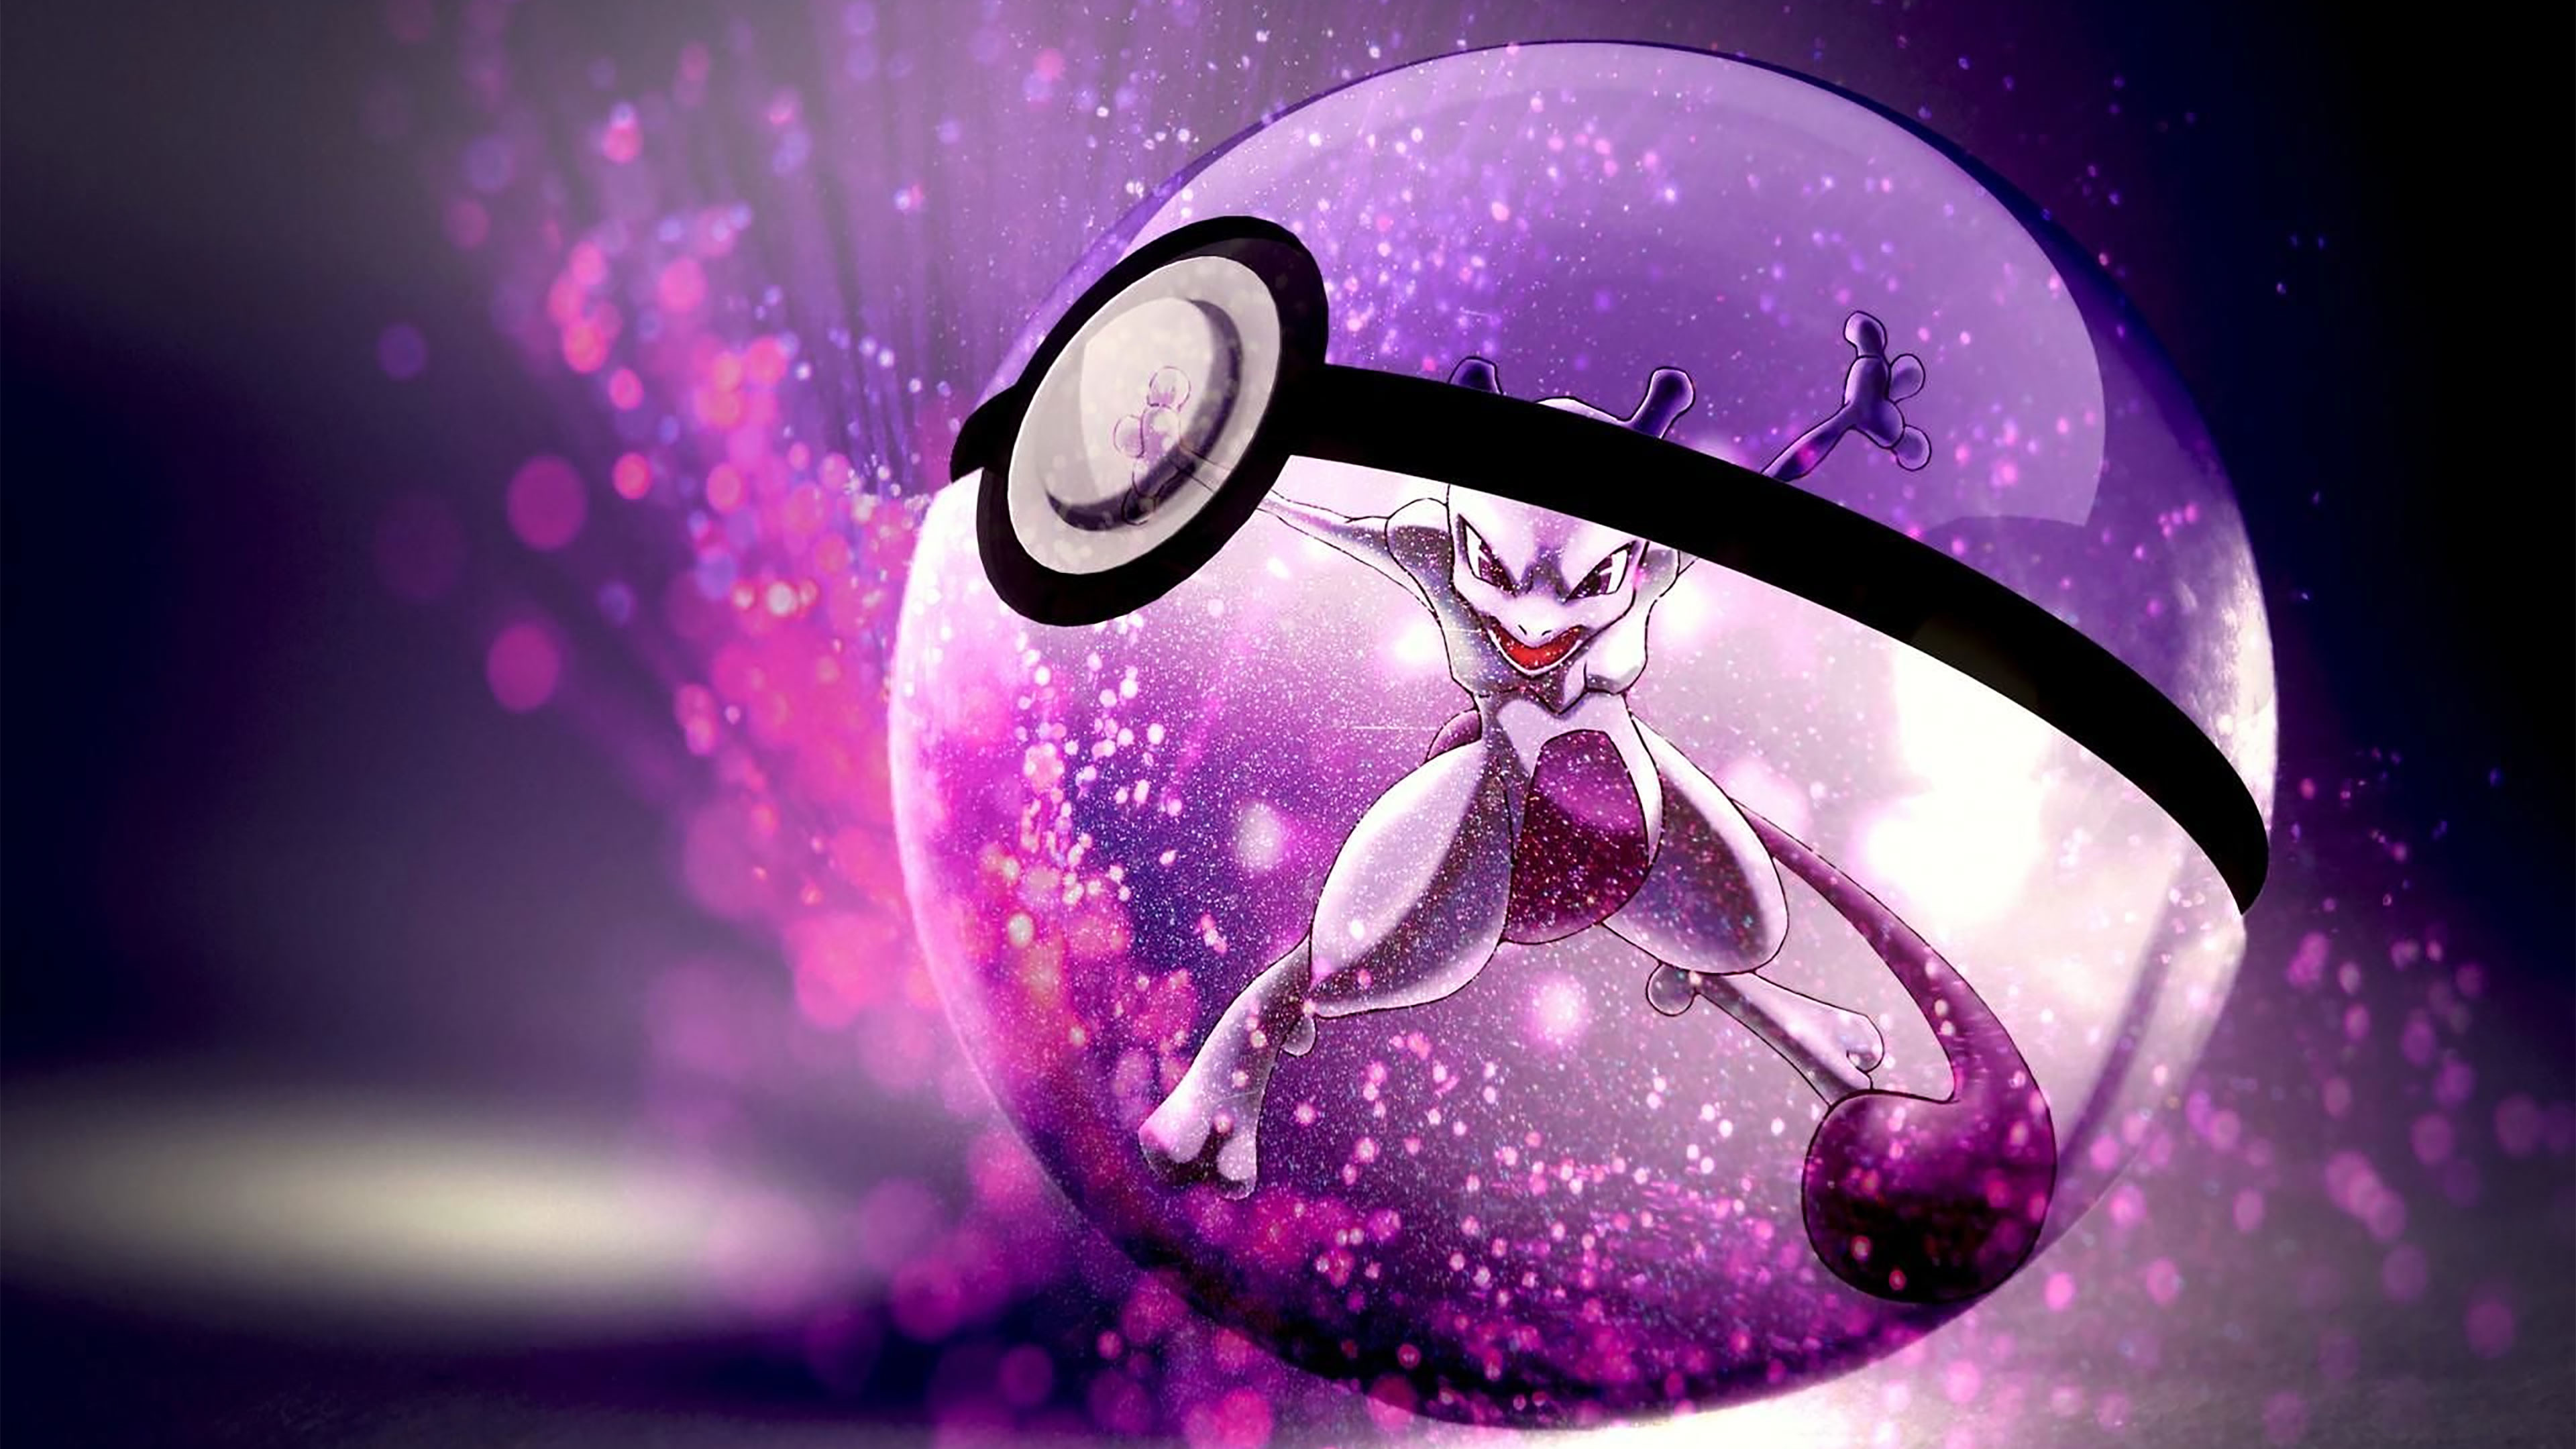 Mewtwo and mew  Mew and mewtwo Cute pokemon pictures Cool pokemon  wallpapers